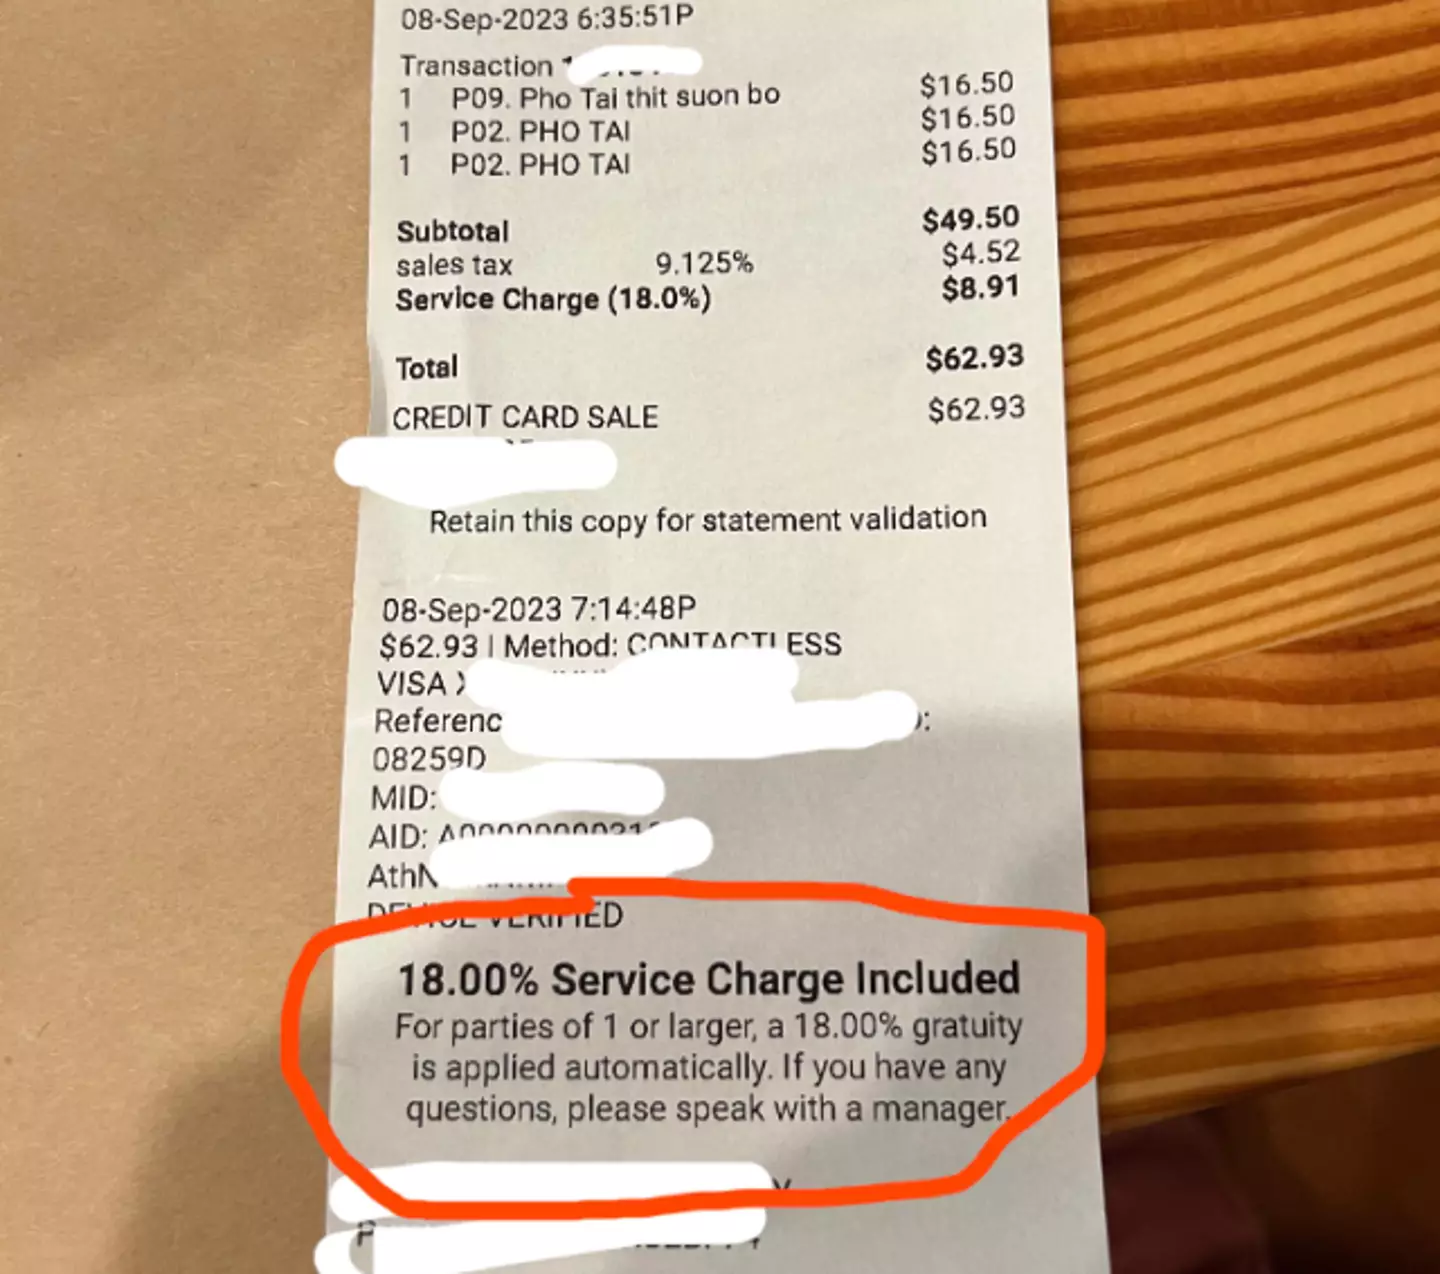 The bill has a 18 per cent service charge for all customers.